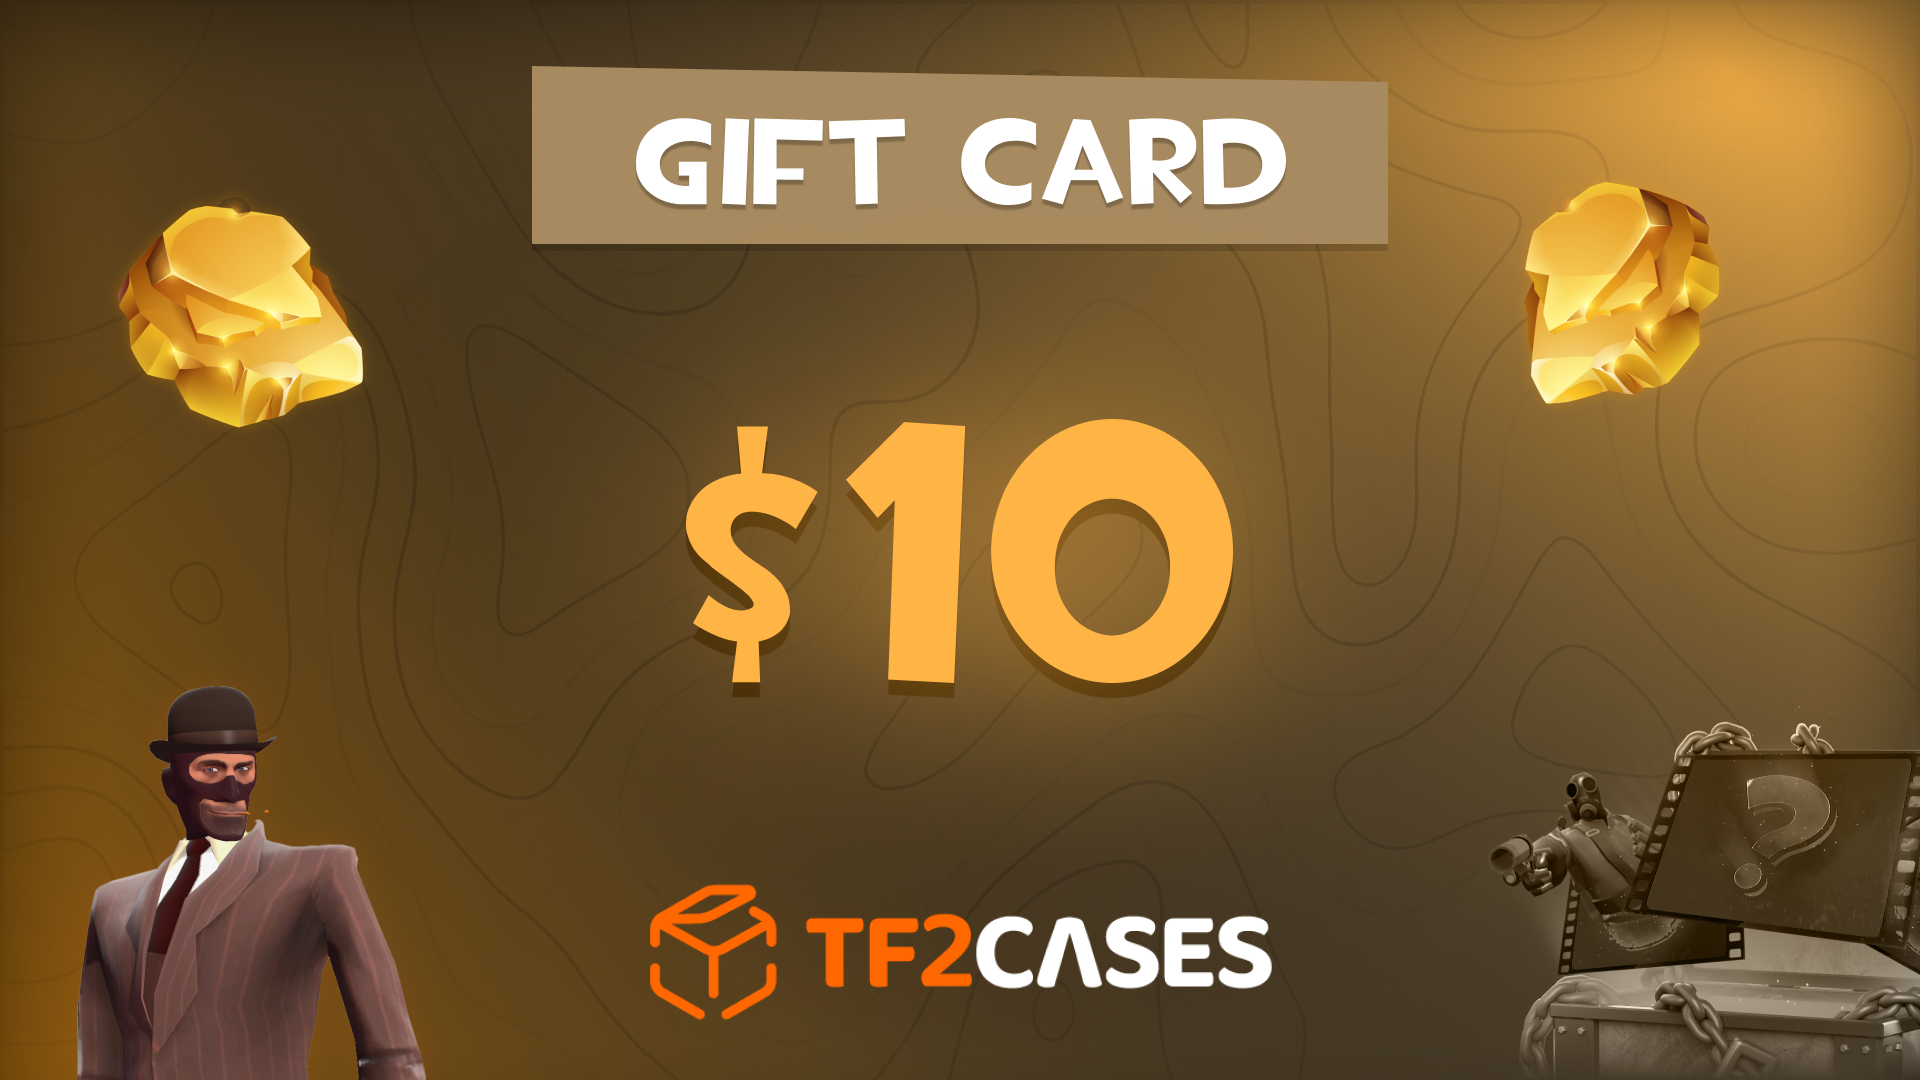 TF2CASES.com $10 Gift Card